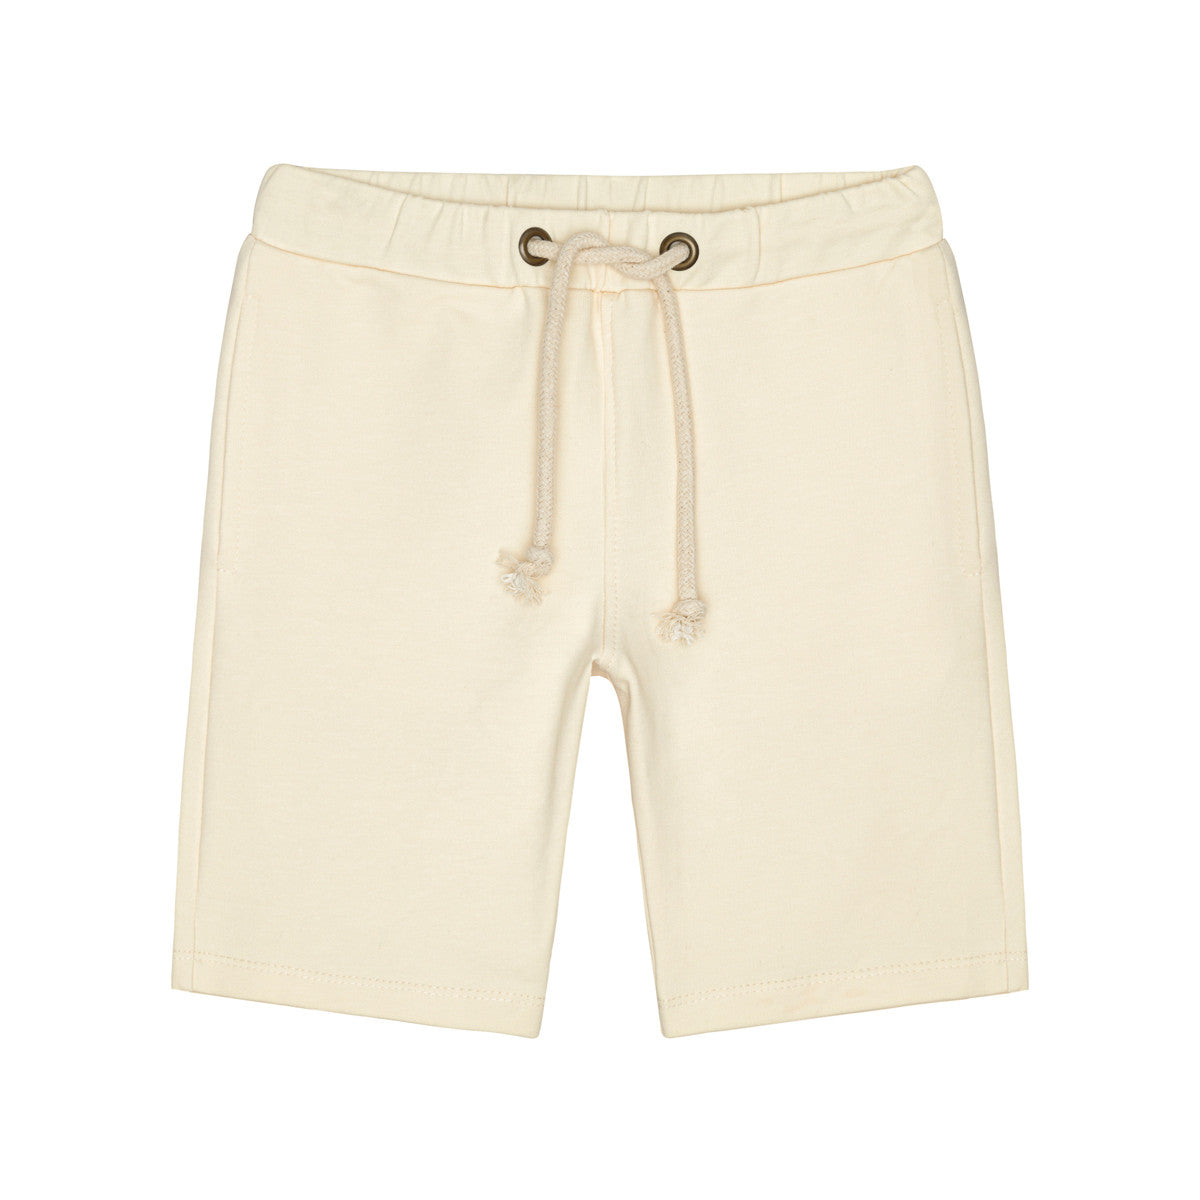 Little Hedonist super comfy organic surfer shorts in Bleached Sand made from our softest organic cotton. Sustainable kids clothing for boys and girls.